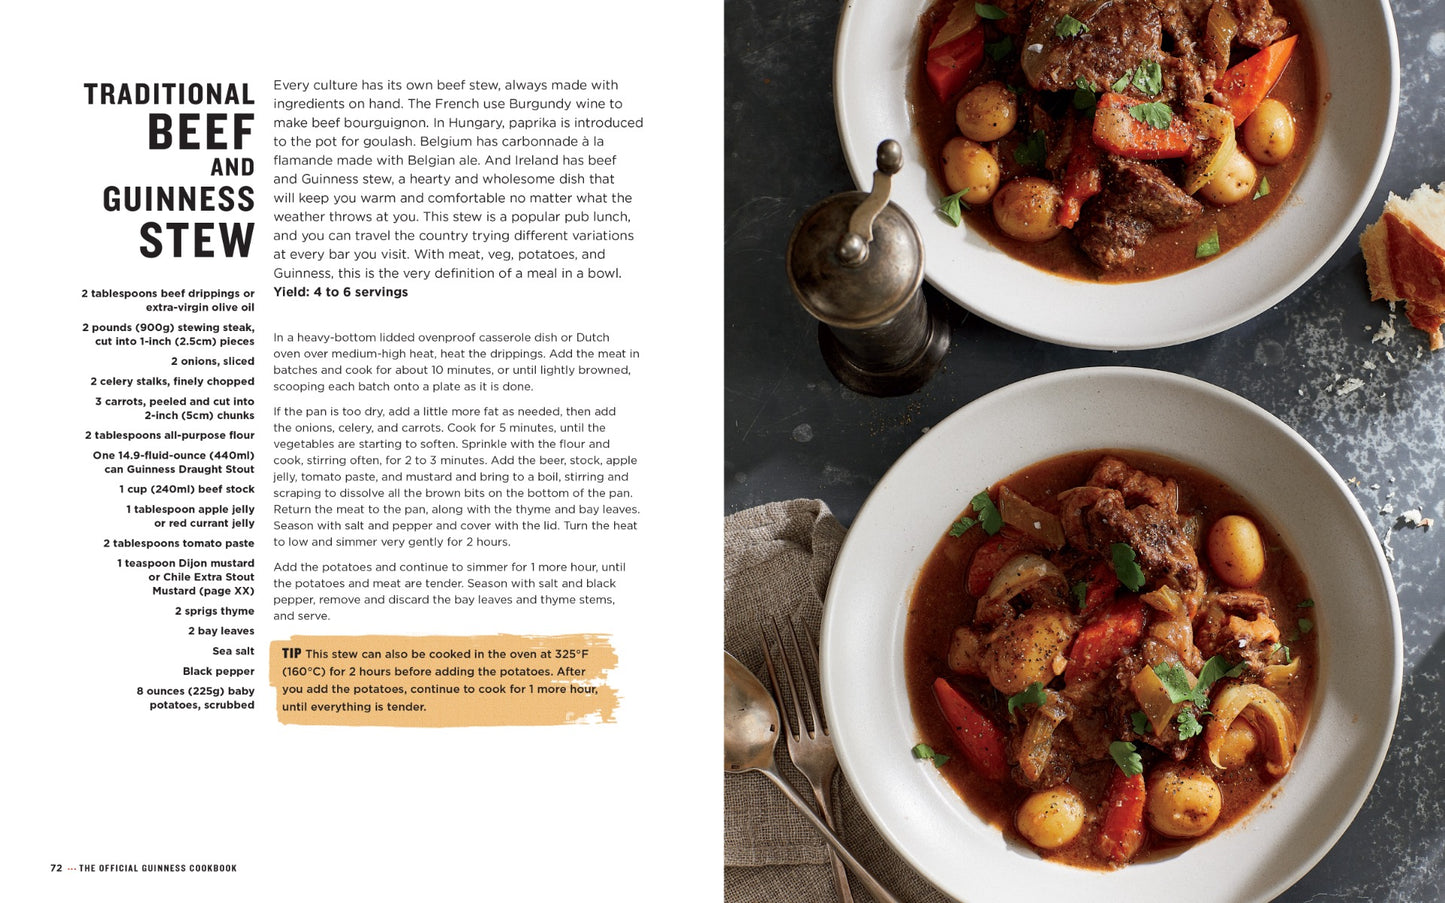 This recipe is a traditional beef chowder stew from the Guinness UK Official Guinness Hardcover Cookbook.